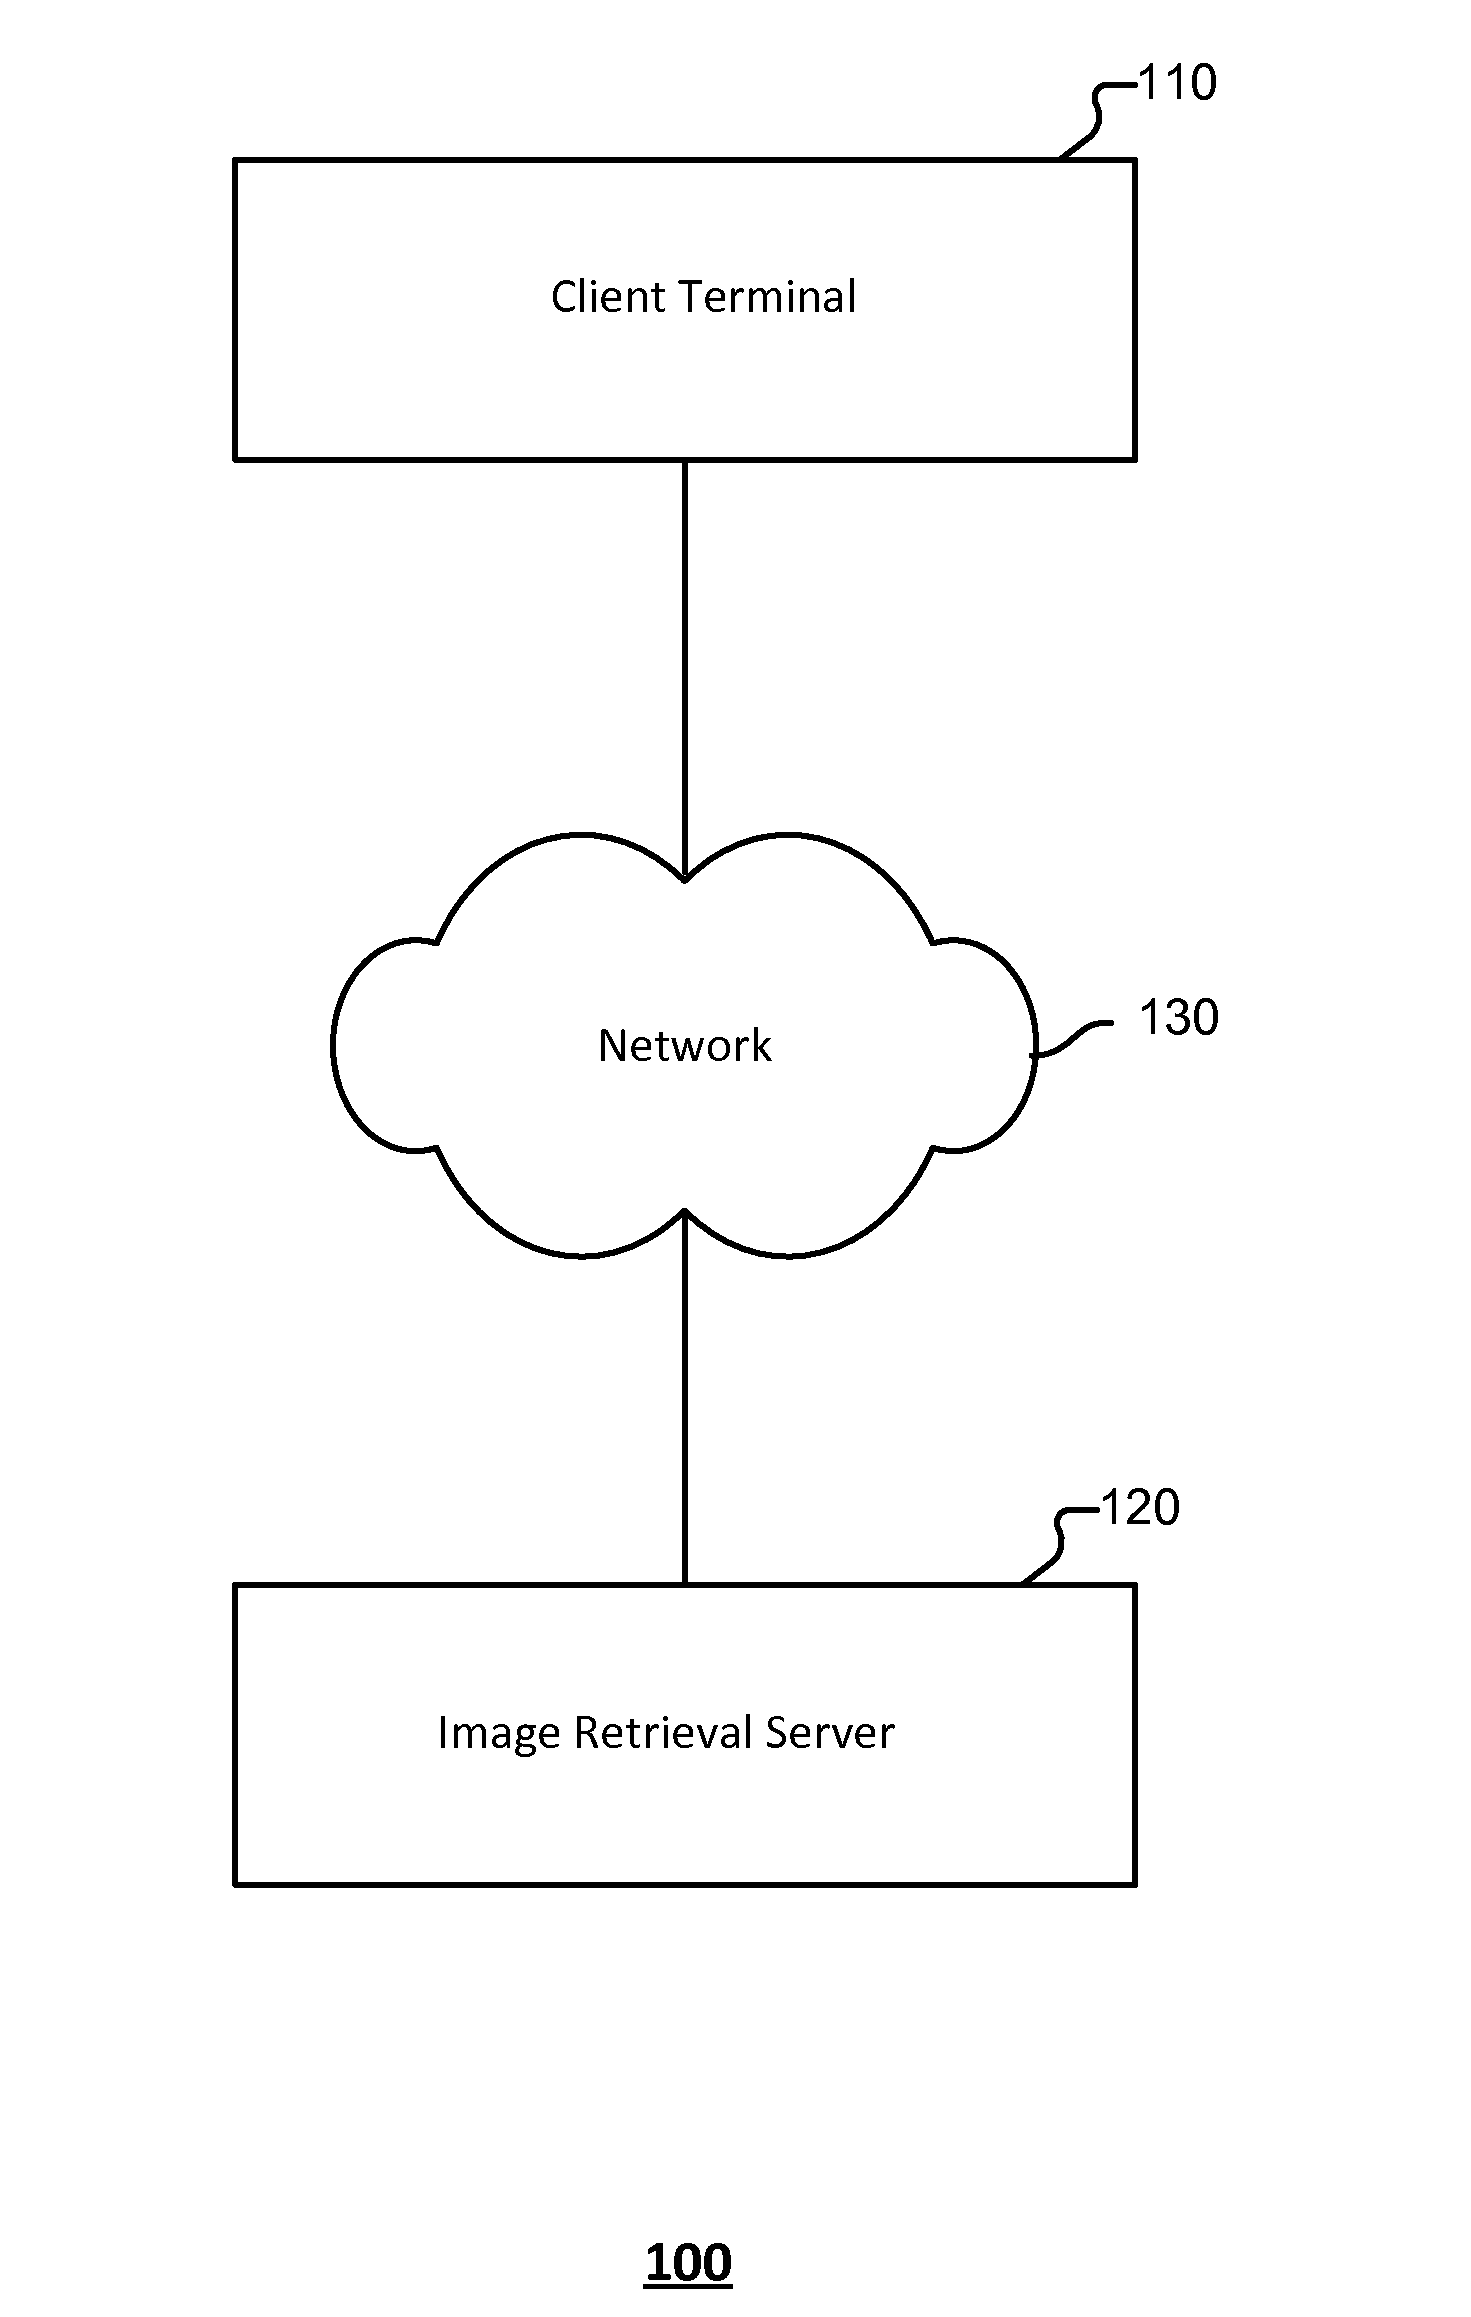 Image index generation based on similarities of image features